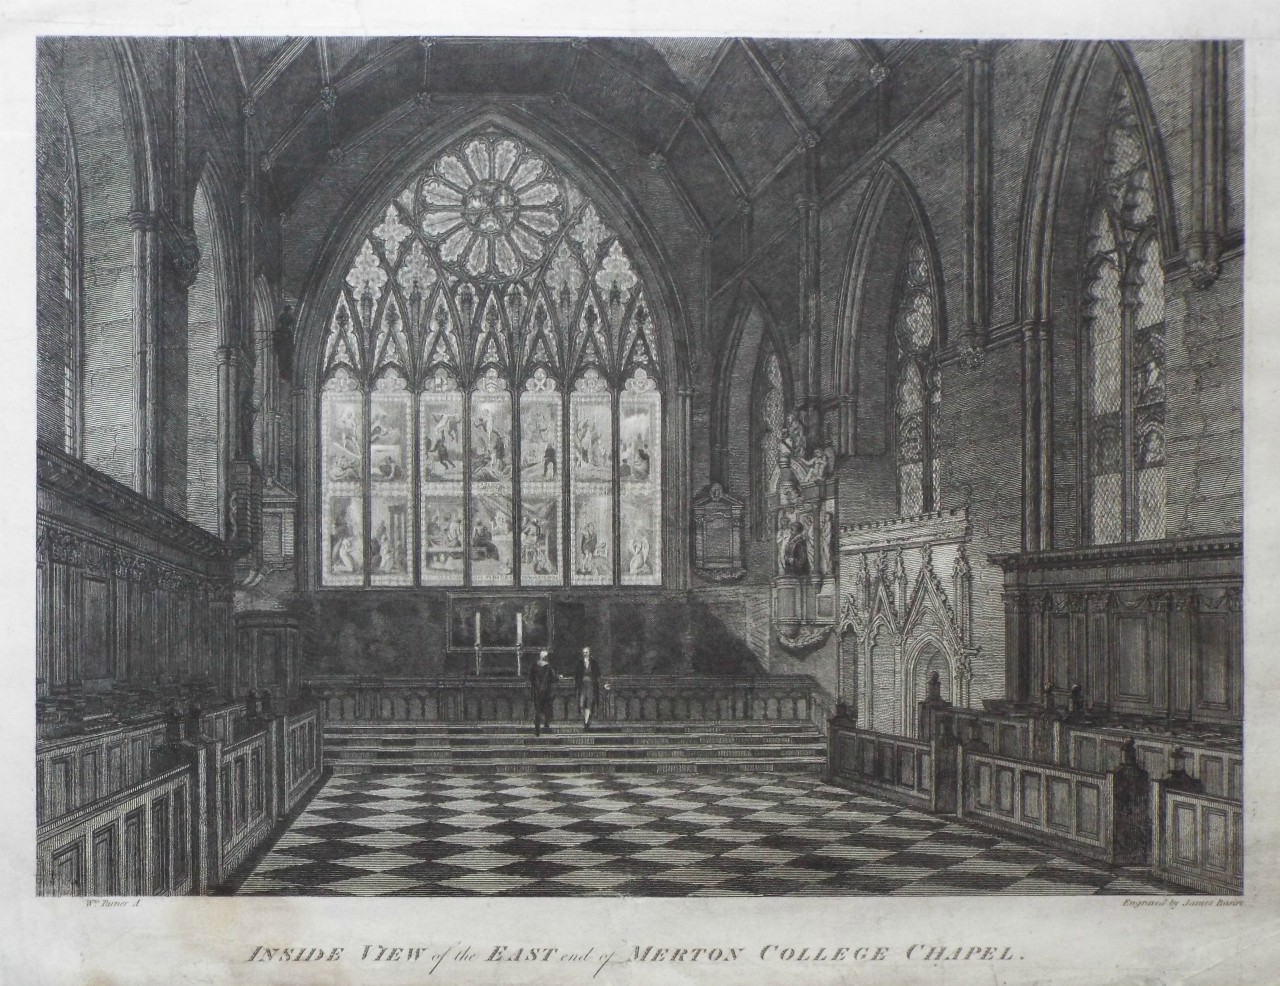 Print - Inside View of the East end of Merton College Chapel. - Basire